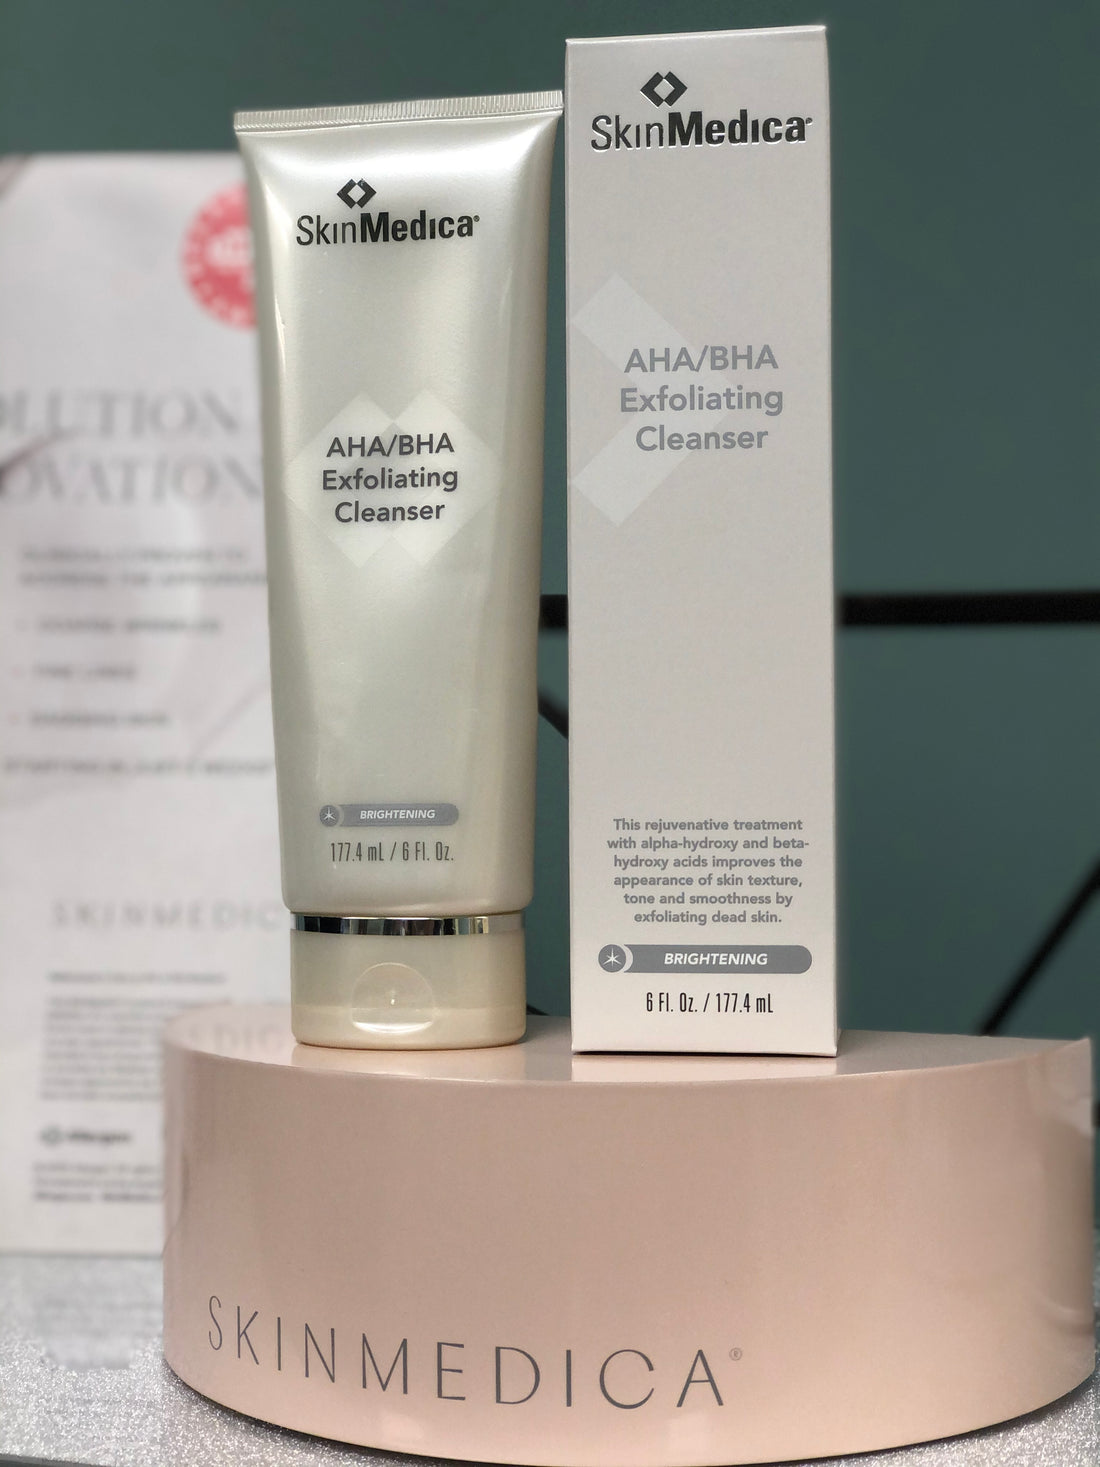 Free AHA-BHA Exfoliating Cleanser with purchase of $200 or more